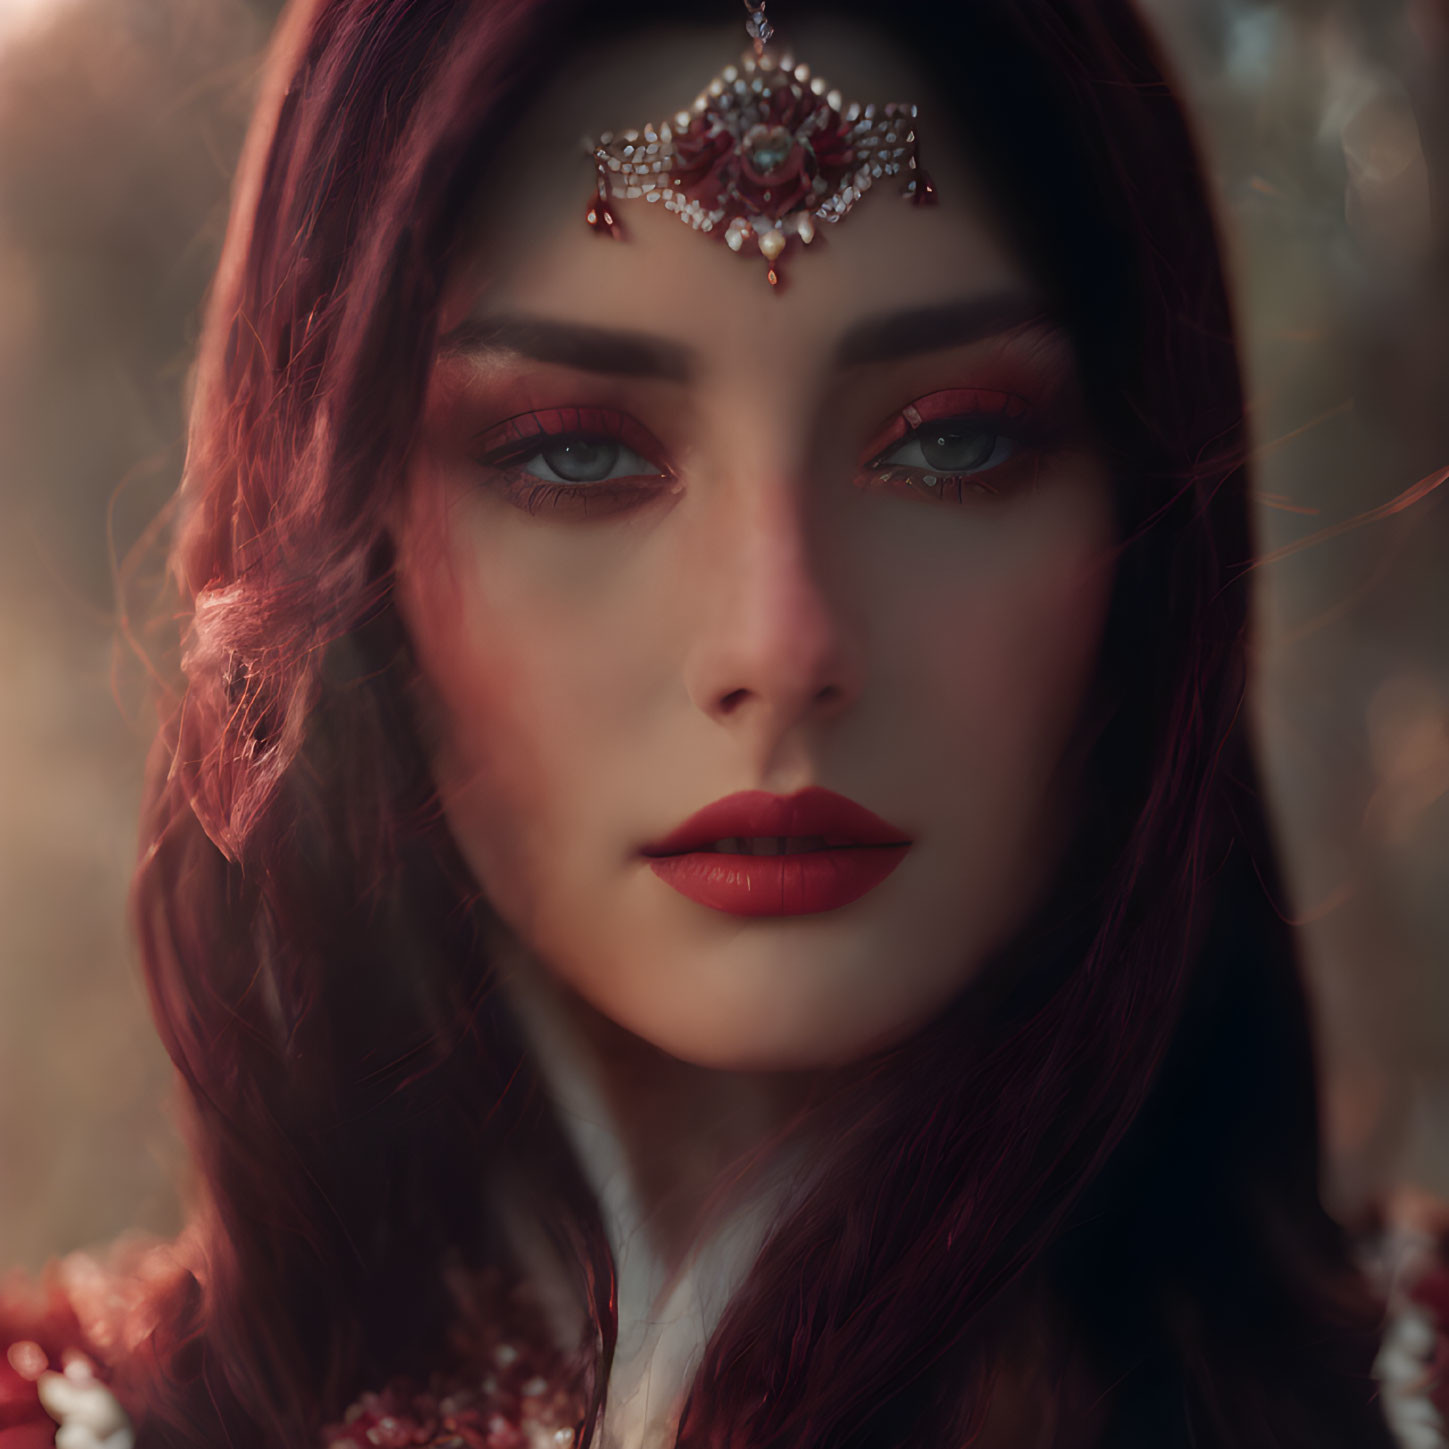 Deep red makeup woman with jeweled headpiece in warm-toned backdrop